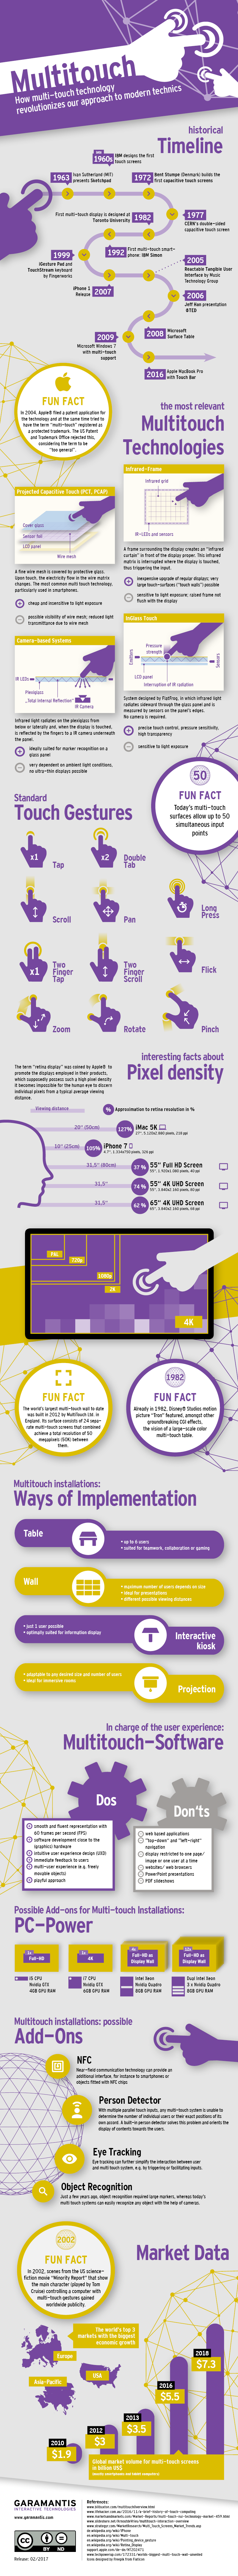 Multitouch Infographic